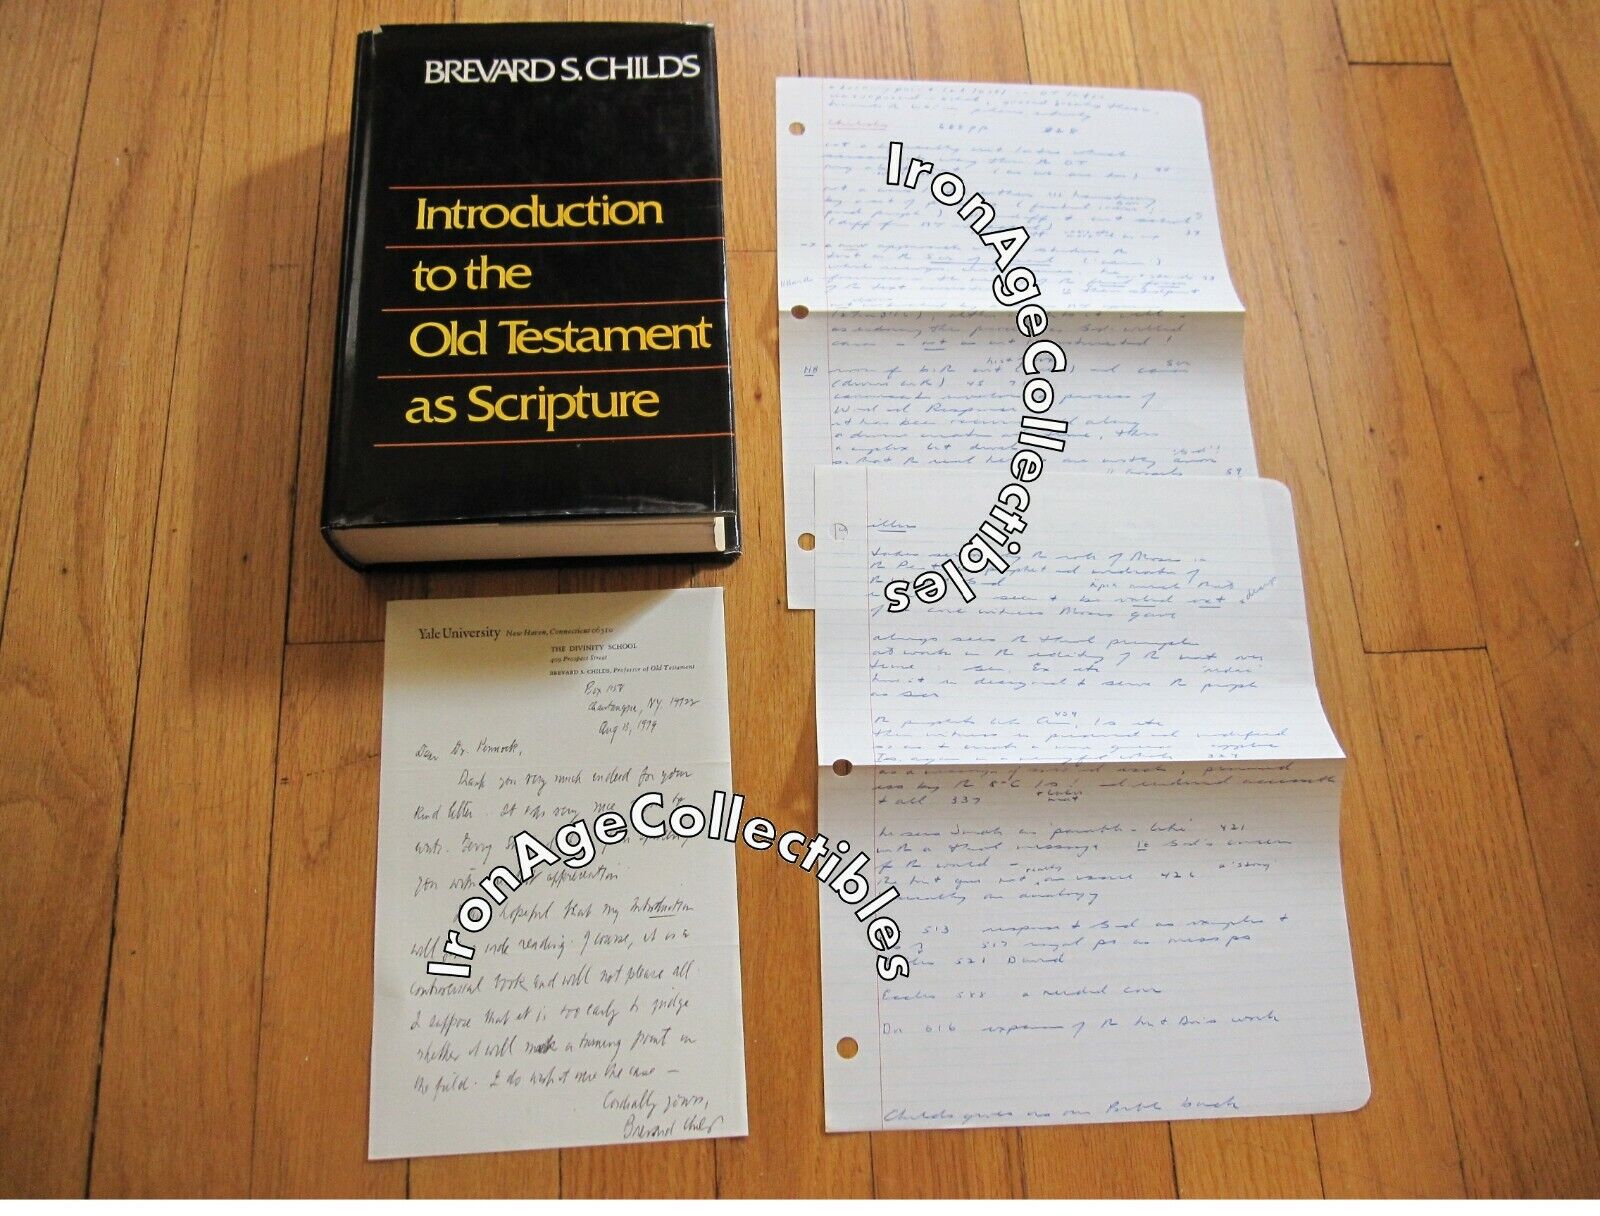 Brevard Childs Personal Letter to Clark Pinnock & Notes Intro to OT as Scripture